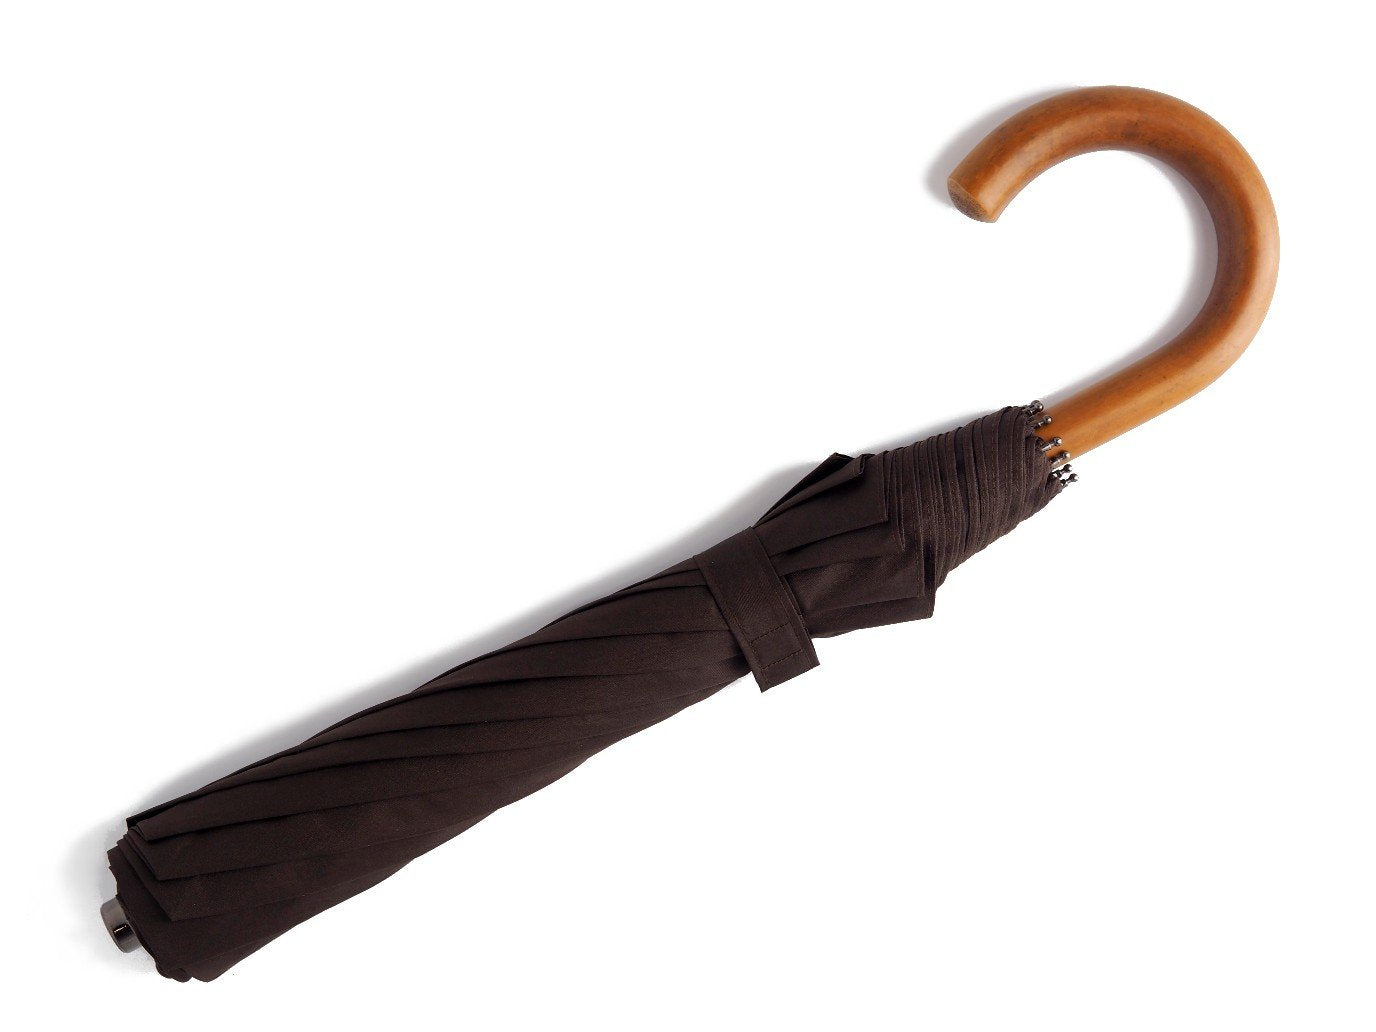 Full length view of malacca handle telescopic Fox Umbrella with brown canopy